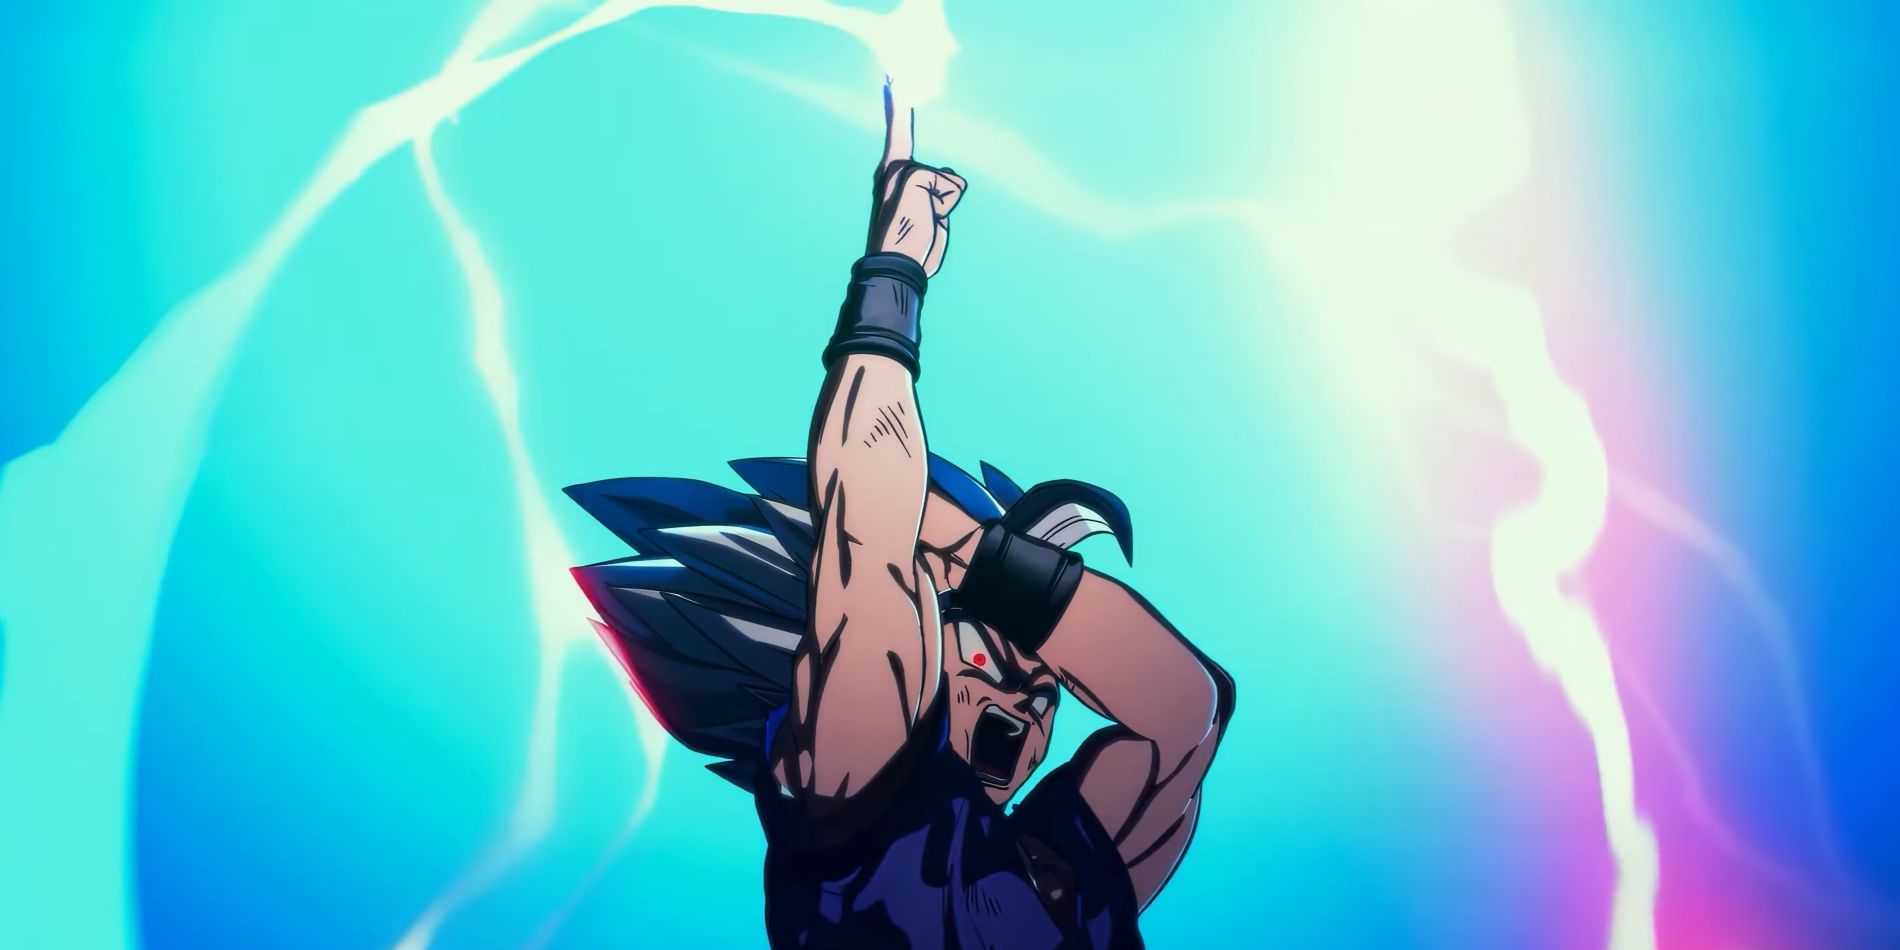 Screenshot from Dragon Ball Super Hero movie shows Beast Gohan raising his arm into the air while white and red lightning forms around him before he launches the special beam cannon.